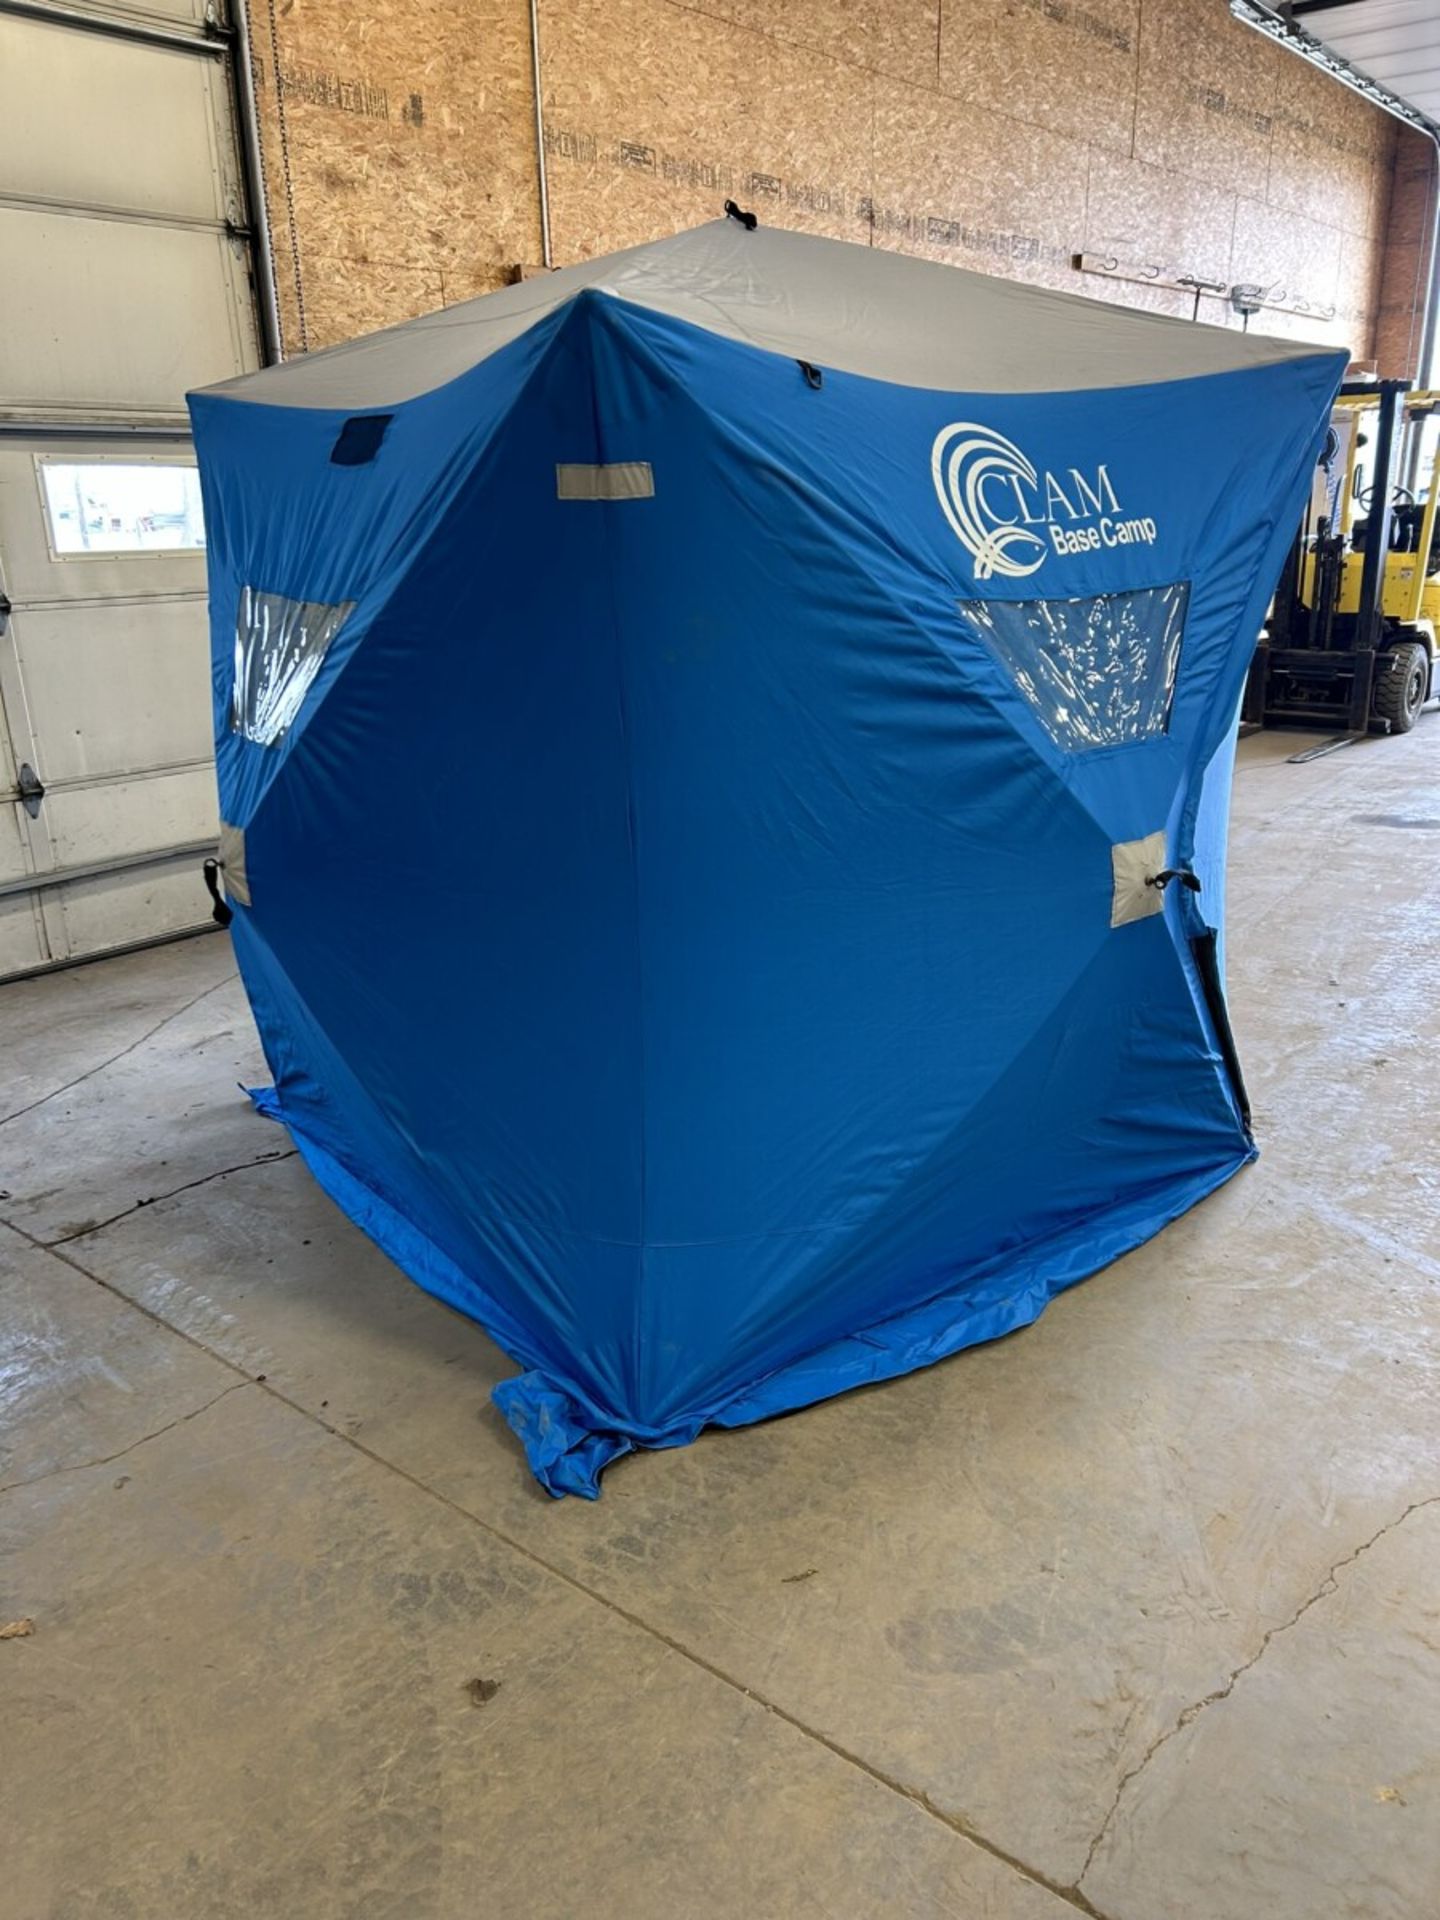 BASE CAMP COLLAPSIBLE ICE FISHING TENT - Image 2 of 8